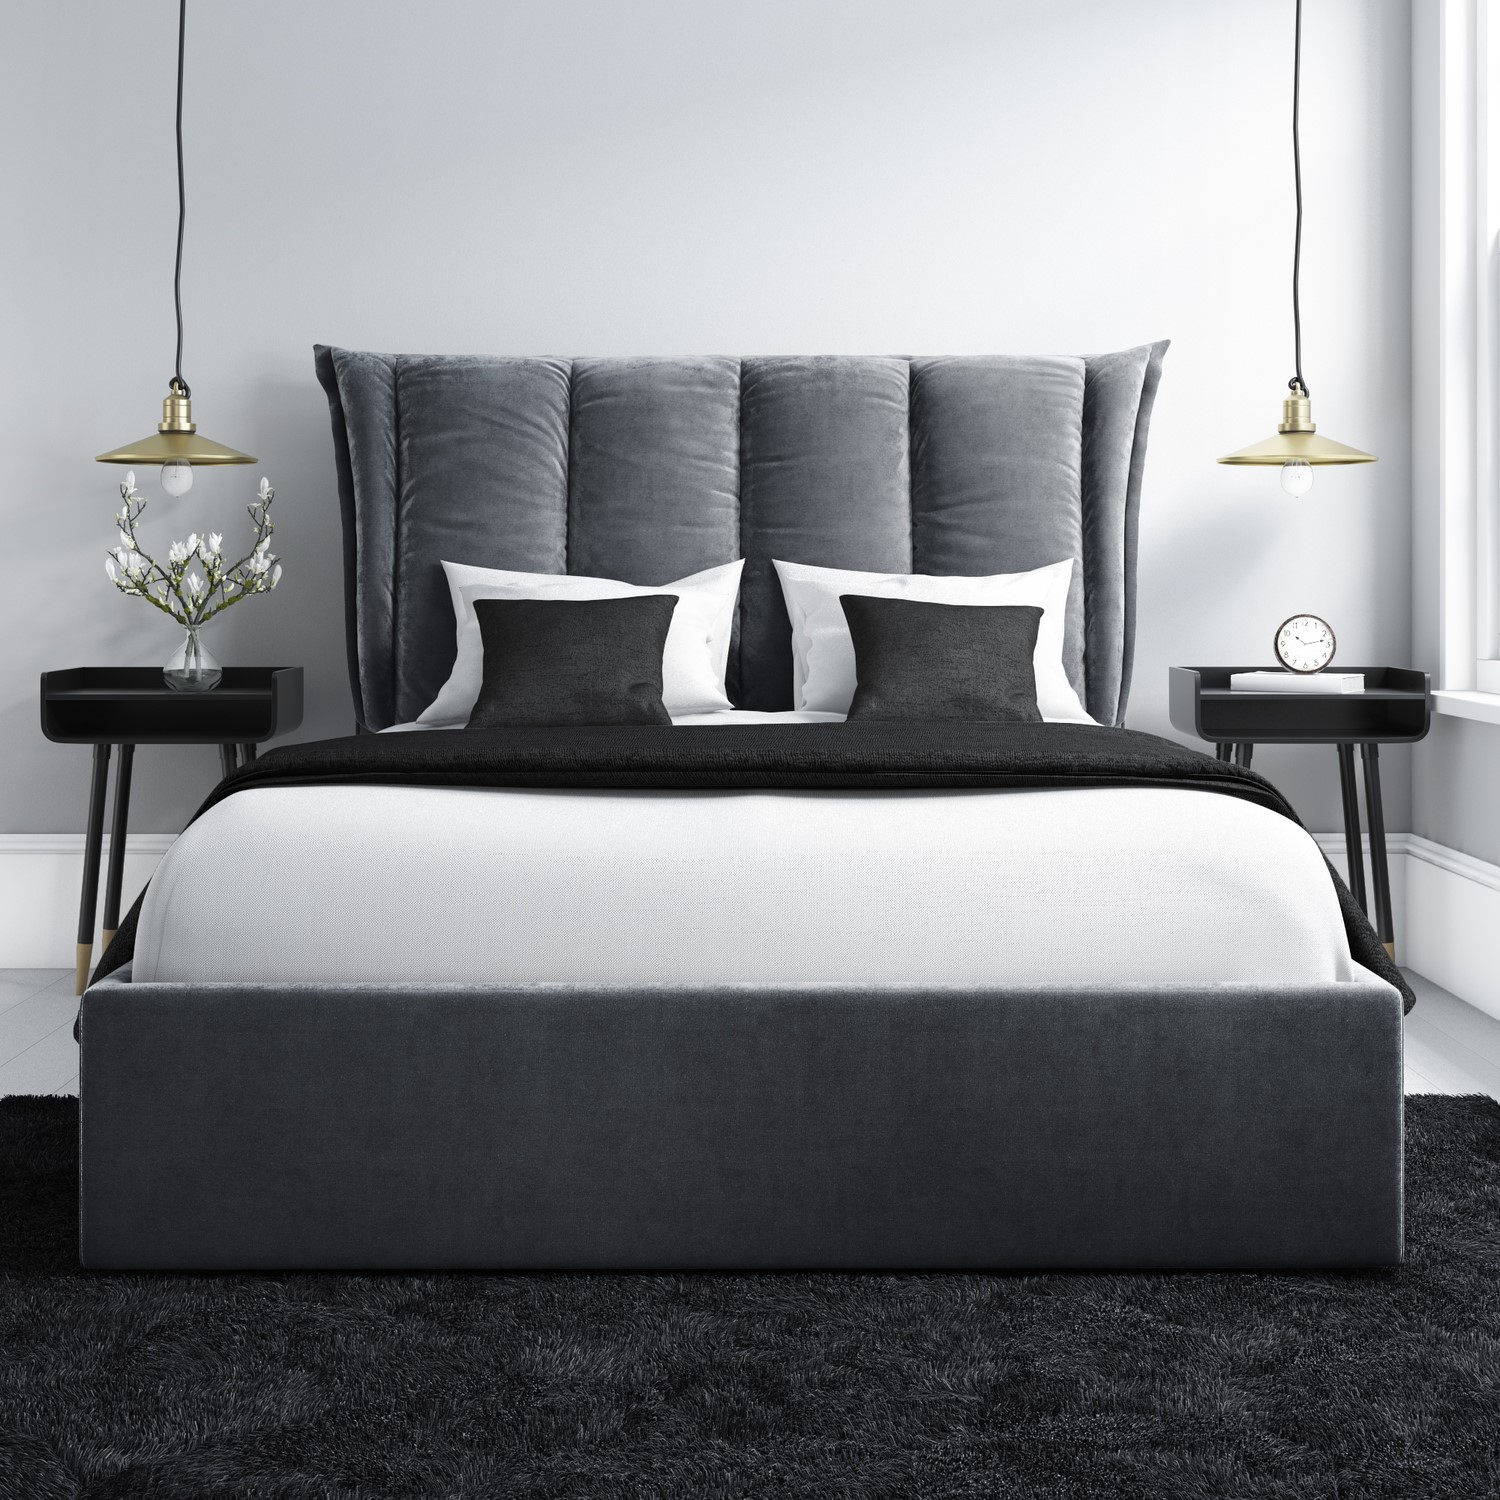 Grey Velvet King Size Ottoman Bed With, How To Build A Headboard For King Size Bed